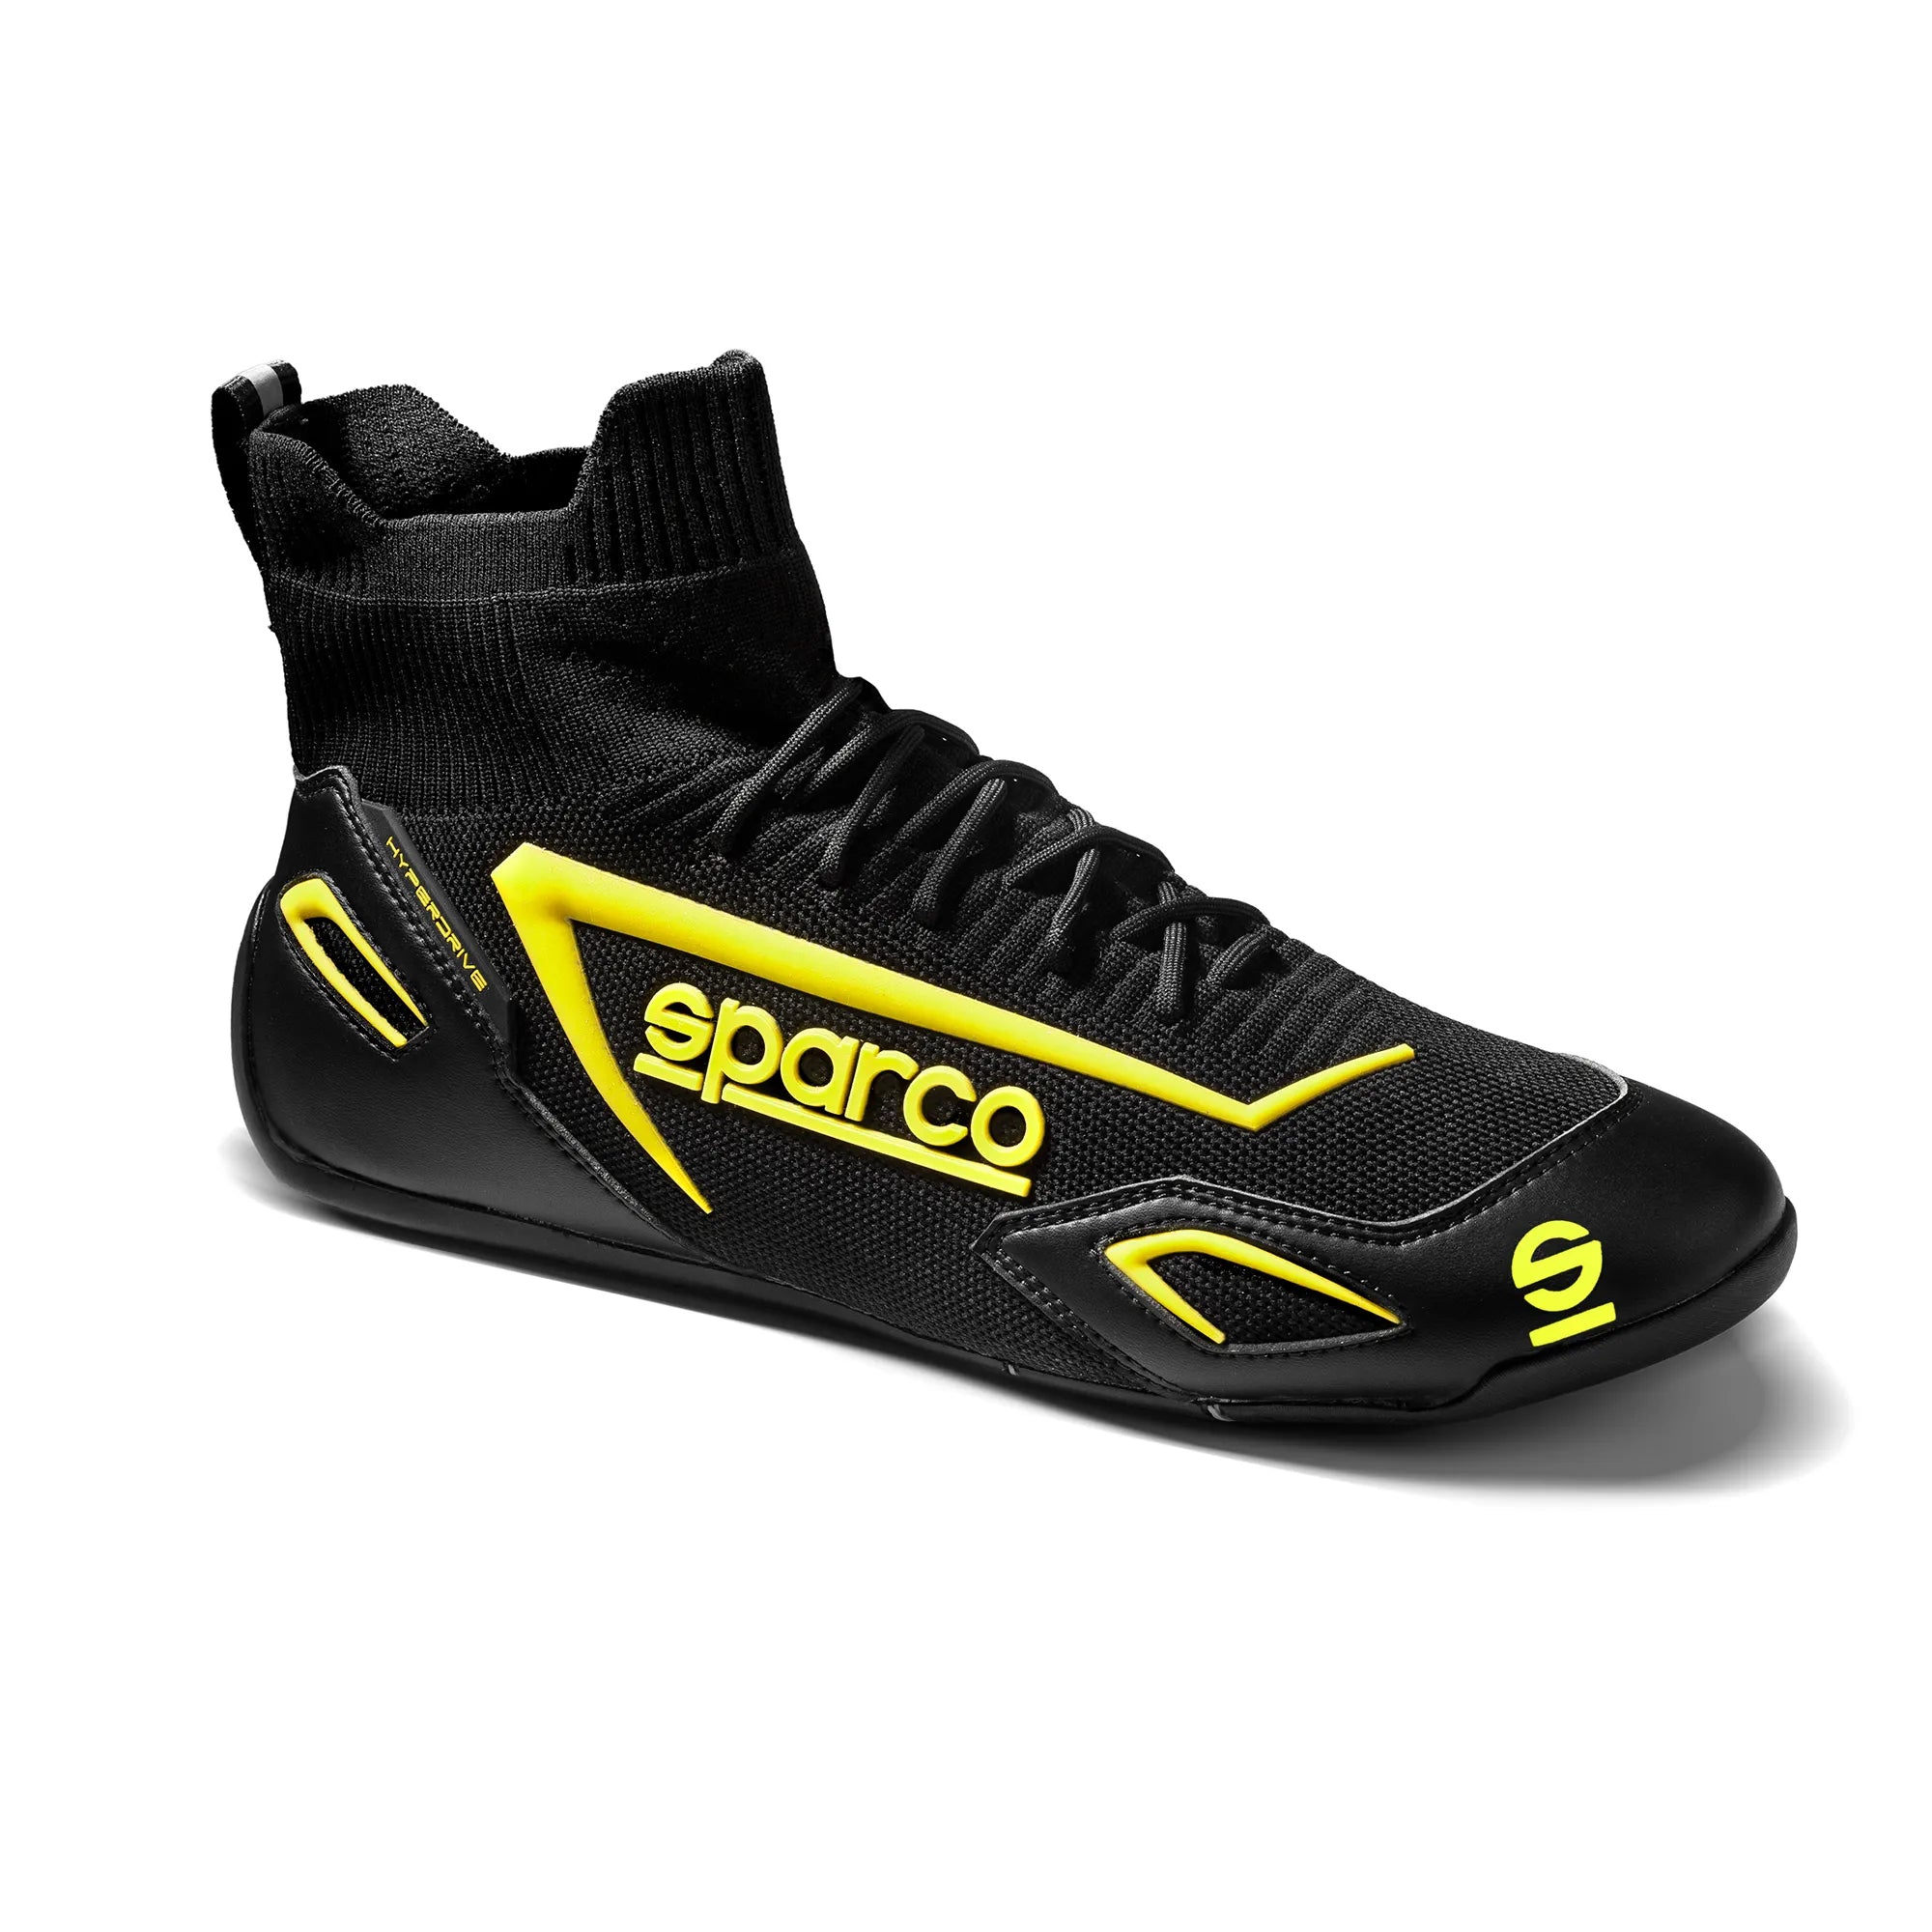 SPARCO 00129344NRGF Gaming sim racing shoes HYPERDRIVE, black/yellow, size 44 Photo-1 